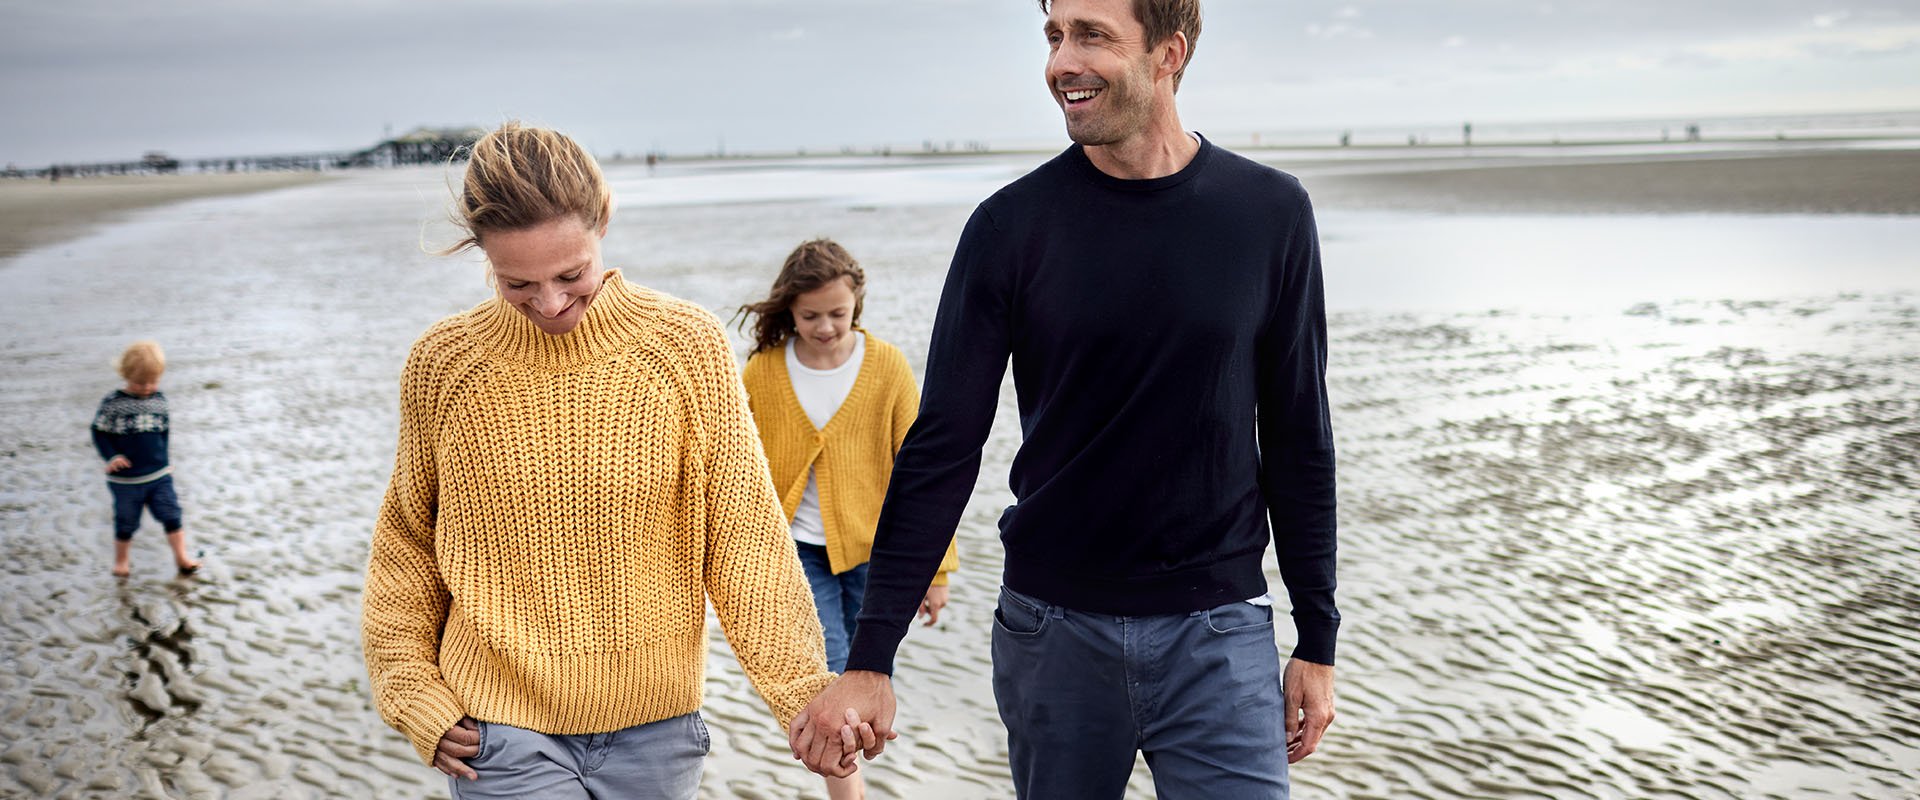 Man and woman with two children on beach as symbol for dating with kids